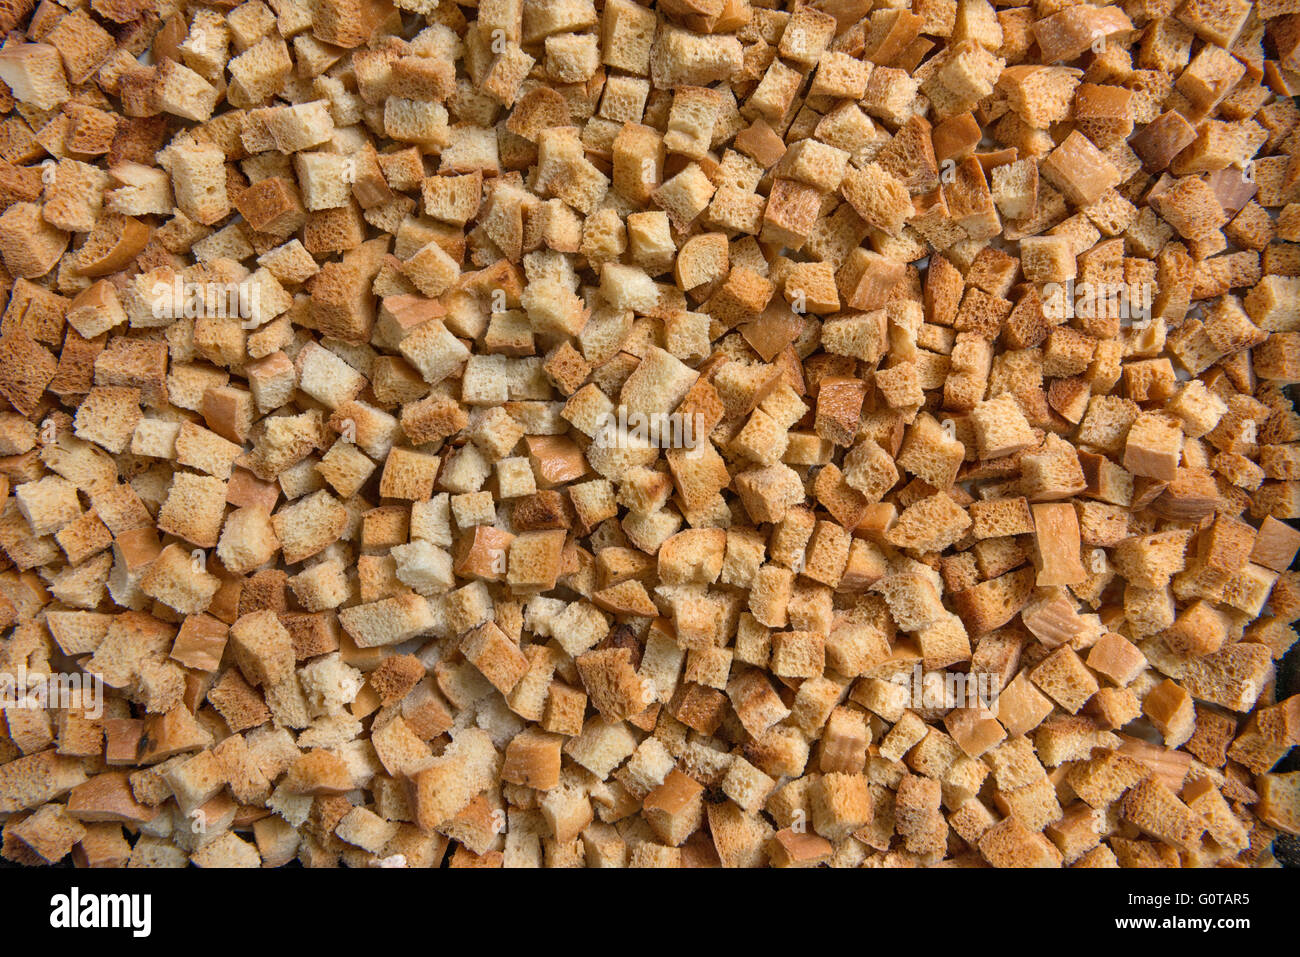 Close-up of many small pieces of dried and browned in oven diced wheat bread as cooking background. Stock Photo